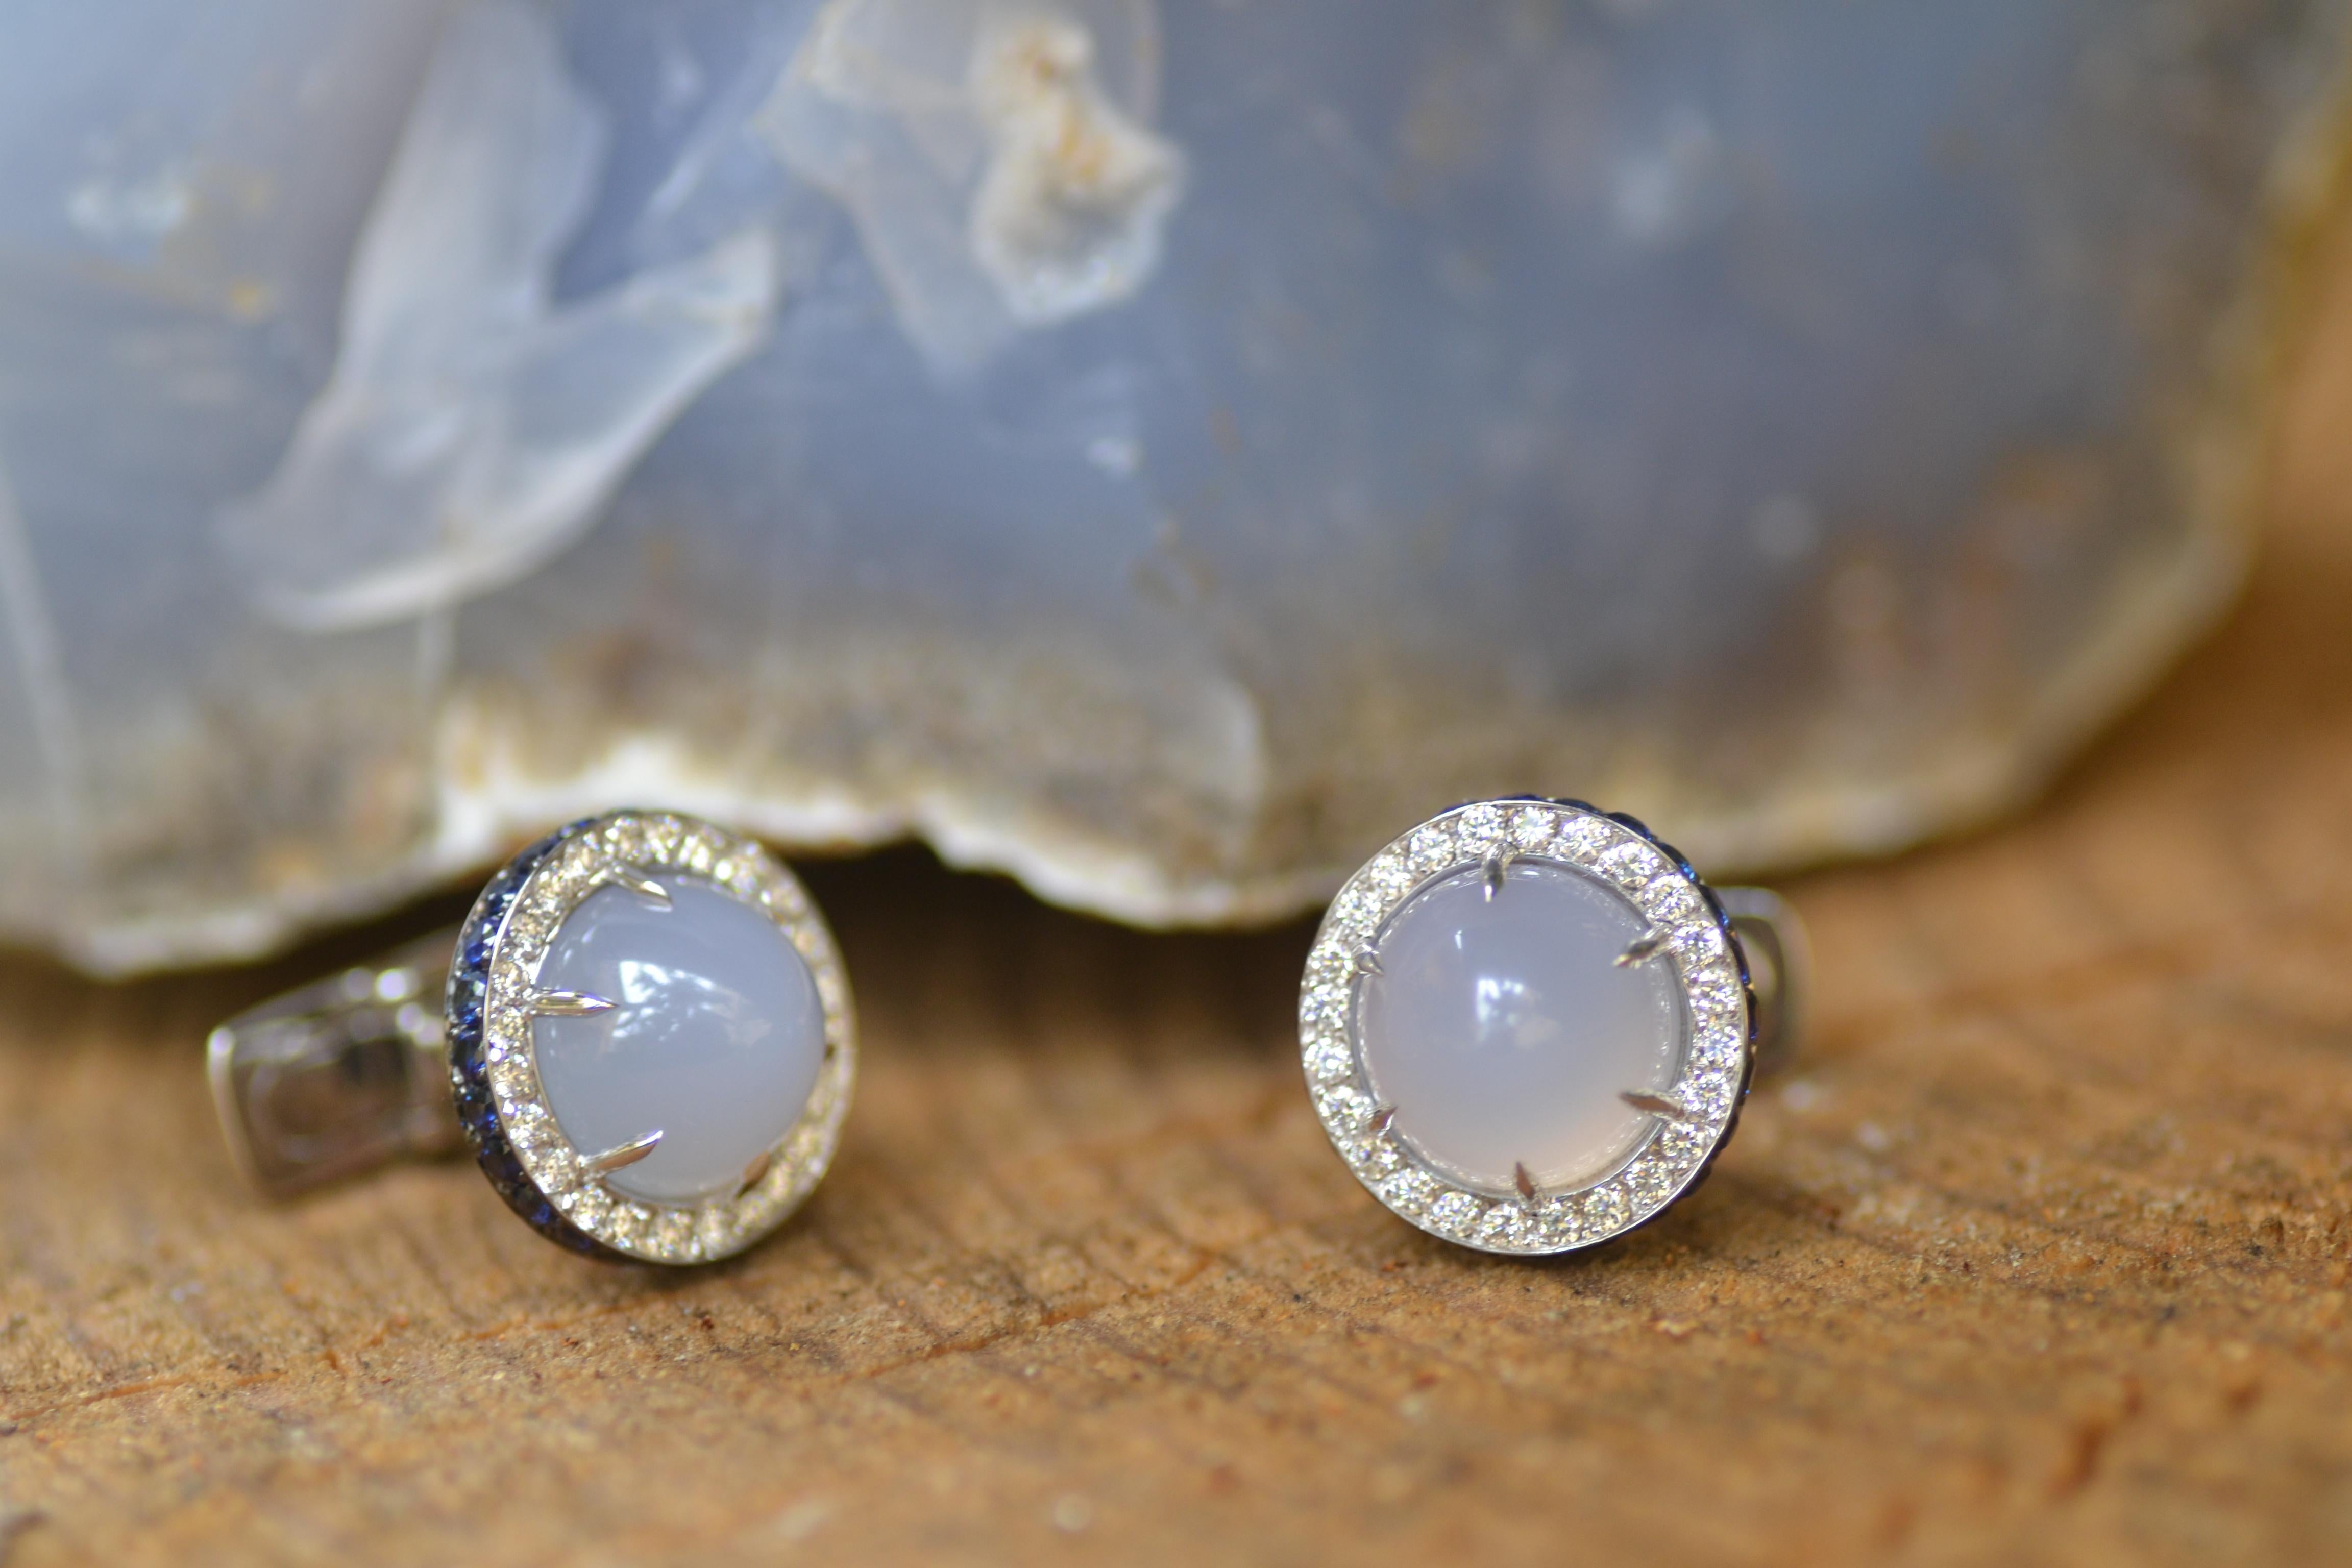 Handcrafted in Margherita Burgener workshop, Italy, the pair of cufflinks feature as central stone a cabochon chalcedony surrounded by a line of colorless diamonds.
A lateral  line of blue sapphires enhance the elegance of these cufflinks. 
T bar is